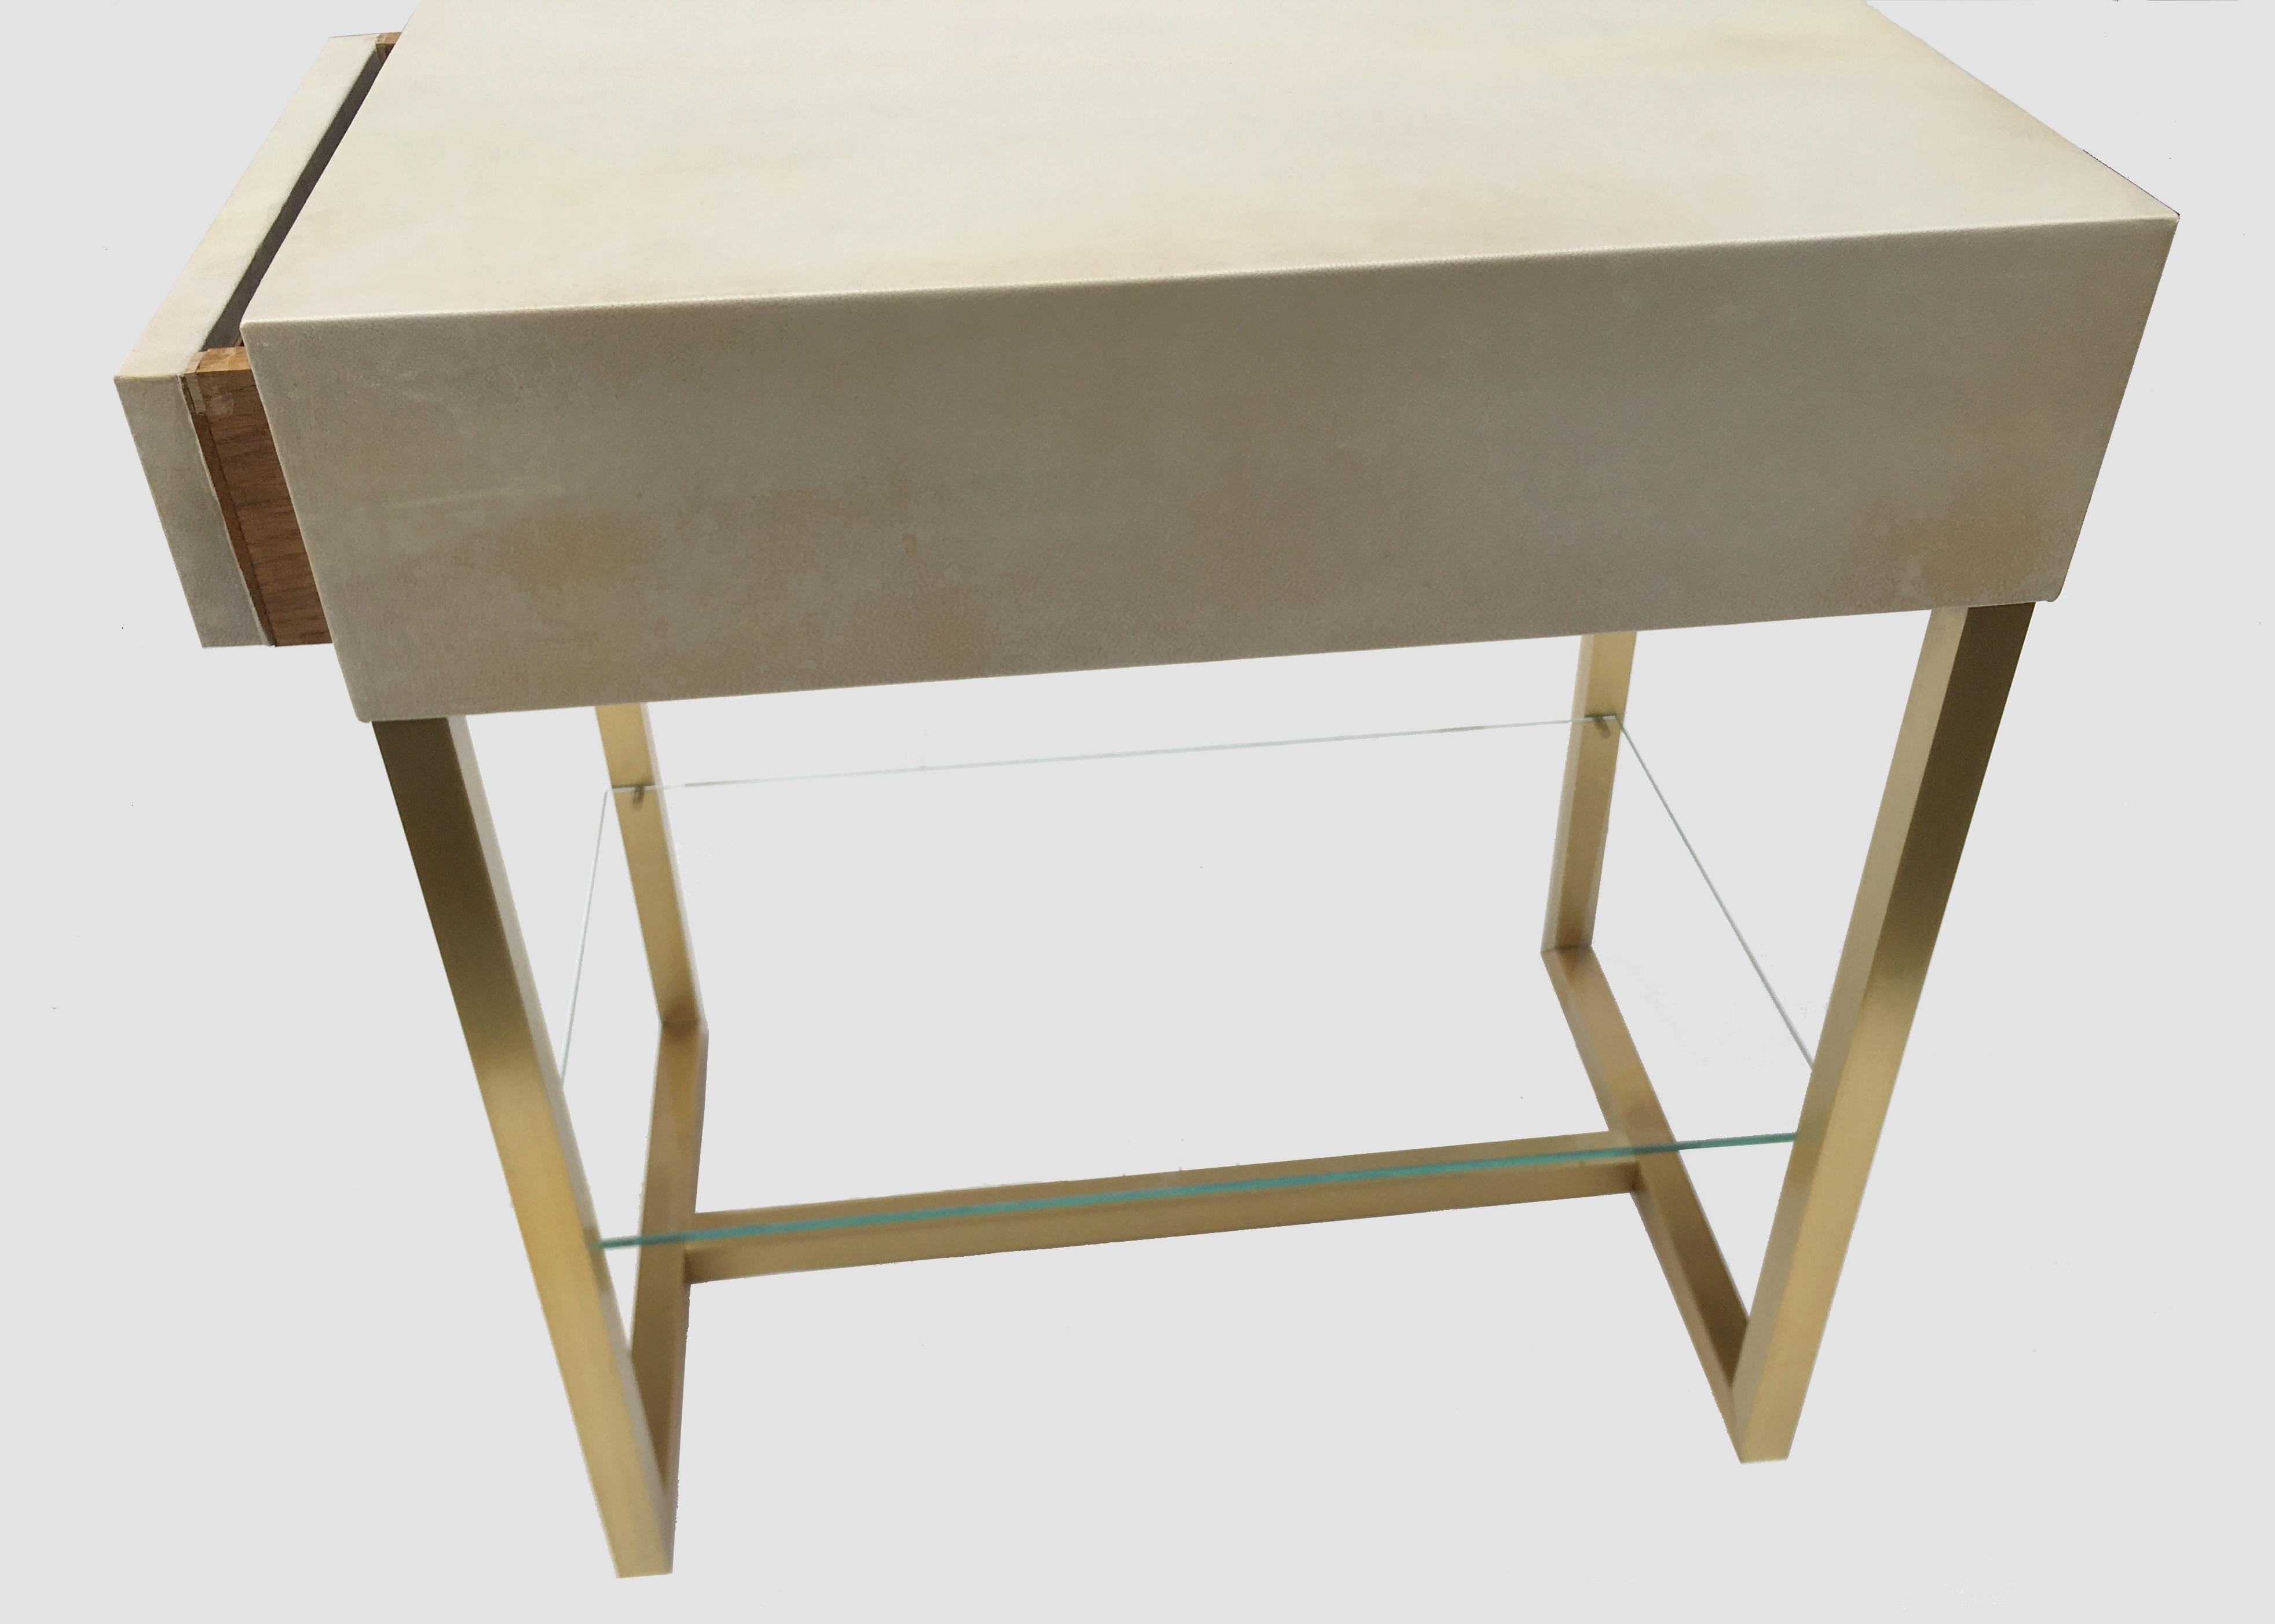 French Pair of End Tables in Parchment and Patinated Brass, Maison Jansen, 1970